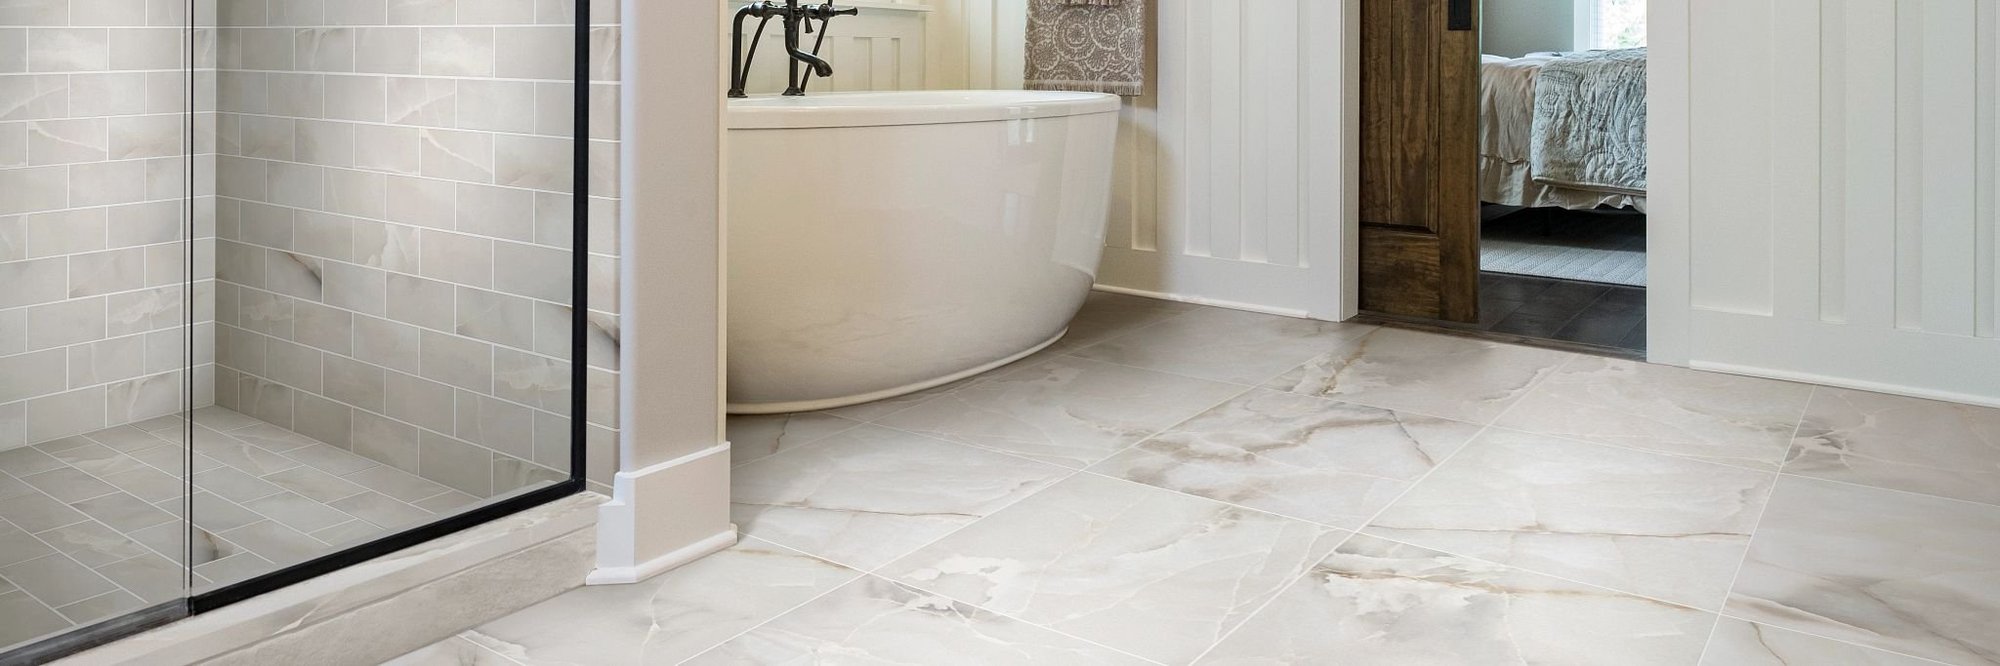 tile floors in bathroom with bath tub and shower